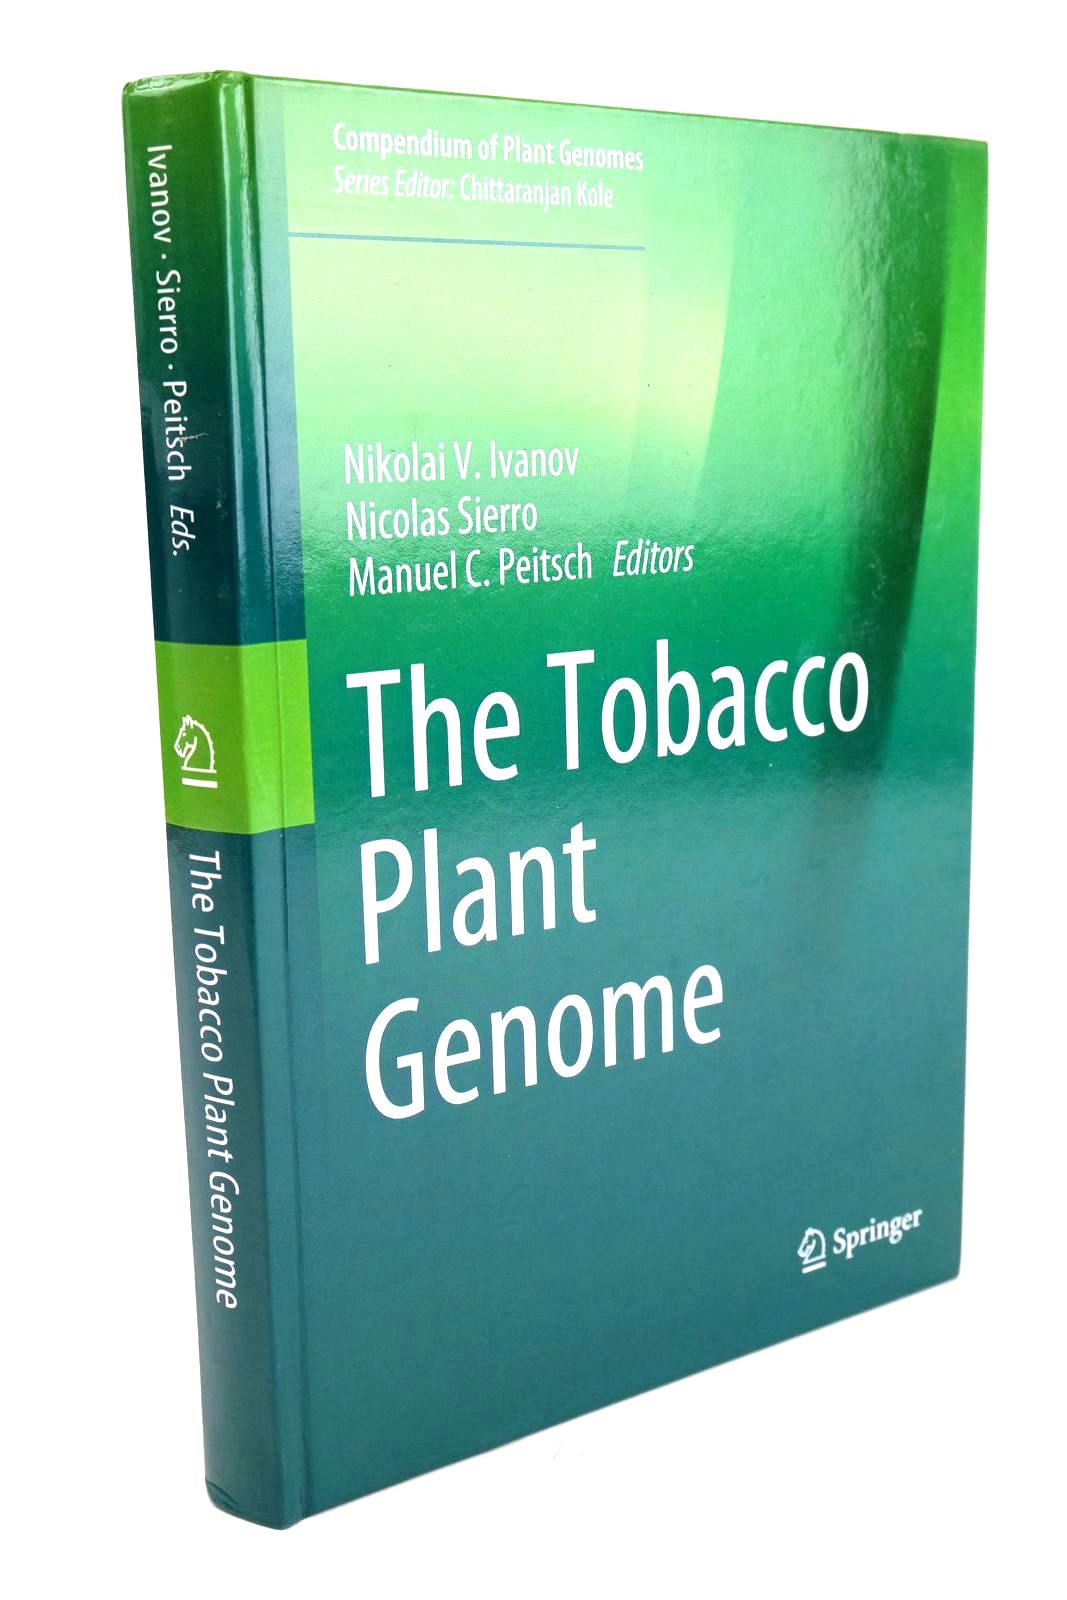 Photo of THE TOBACCO PLANT GENOME written by Ivanov, Nikolai V. Sierro, Nicolas Peitsch, Manuel C. published by Springer (STOCK CODE: 1324172)  for sale by Stella & Rose's Books